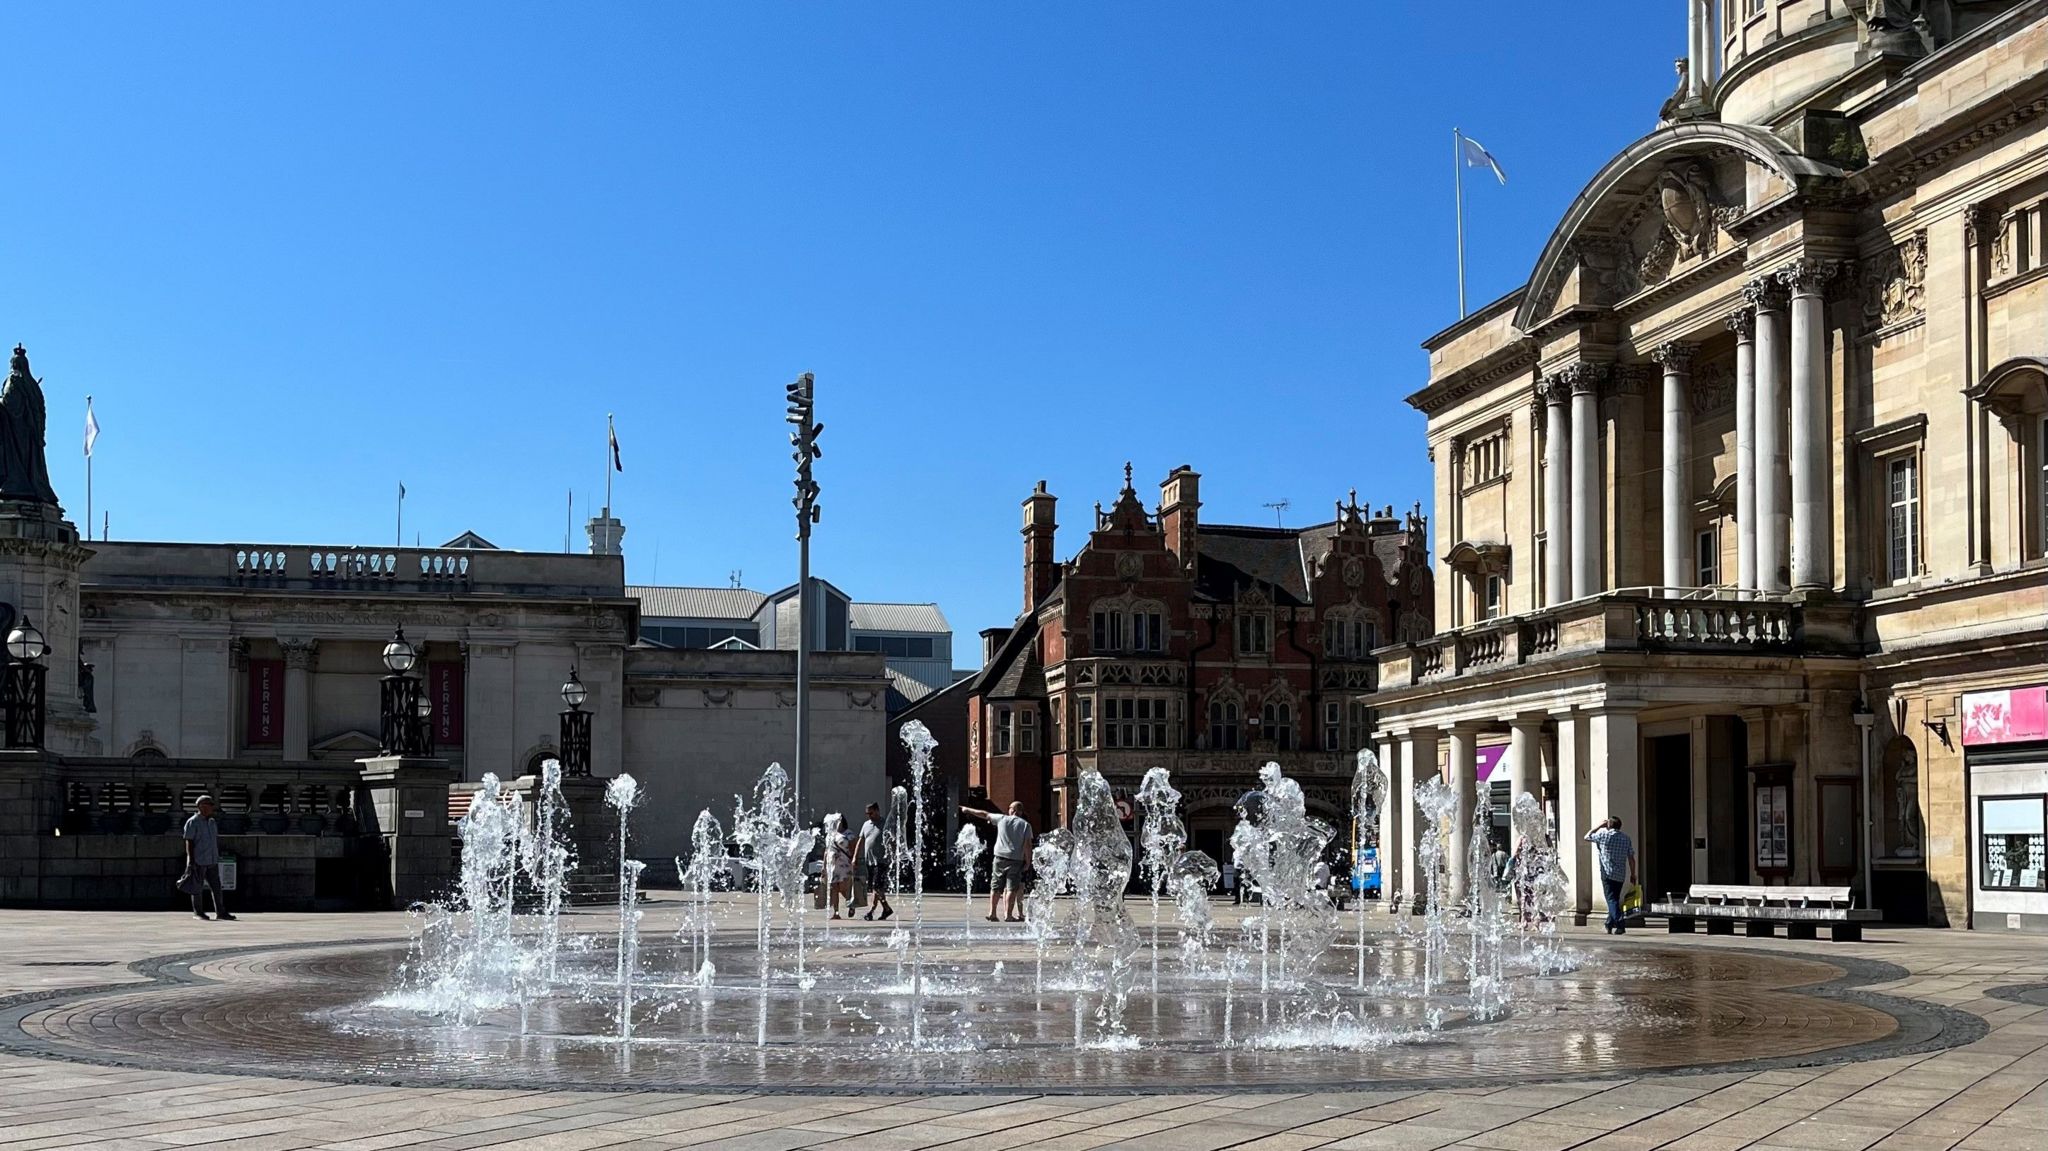 The fountains in Hull's Queen Victoria Square